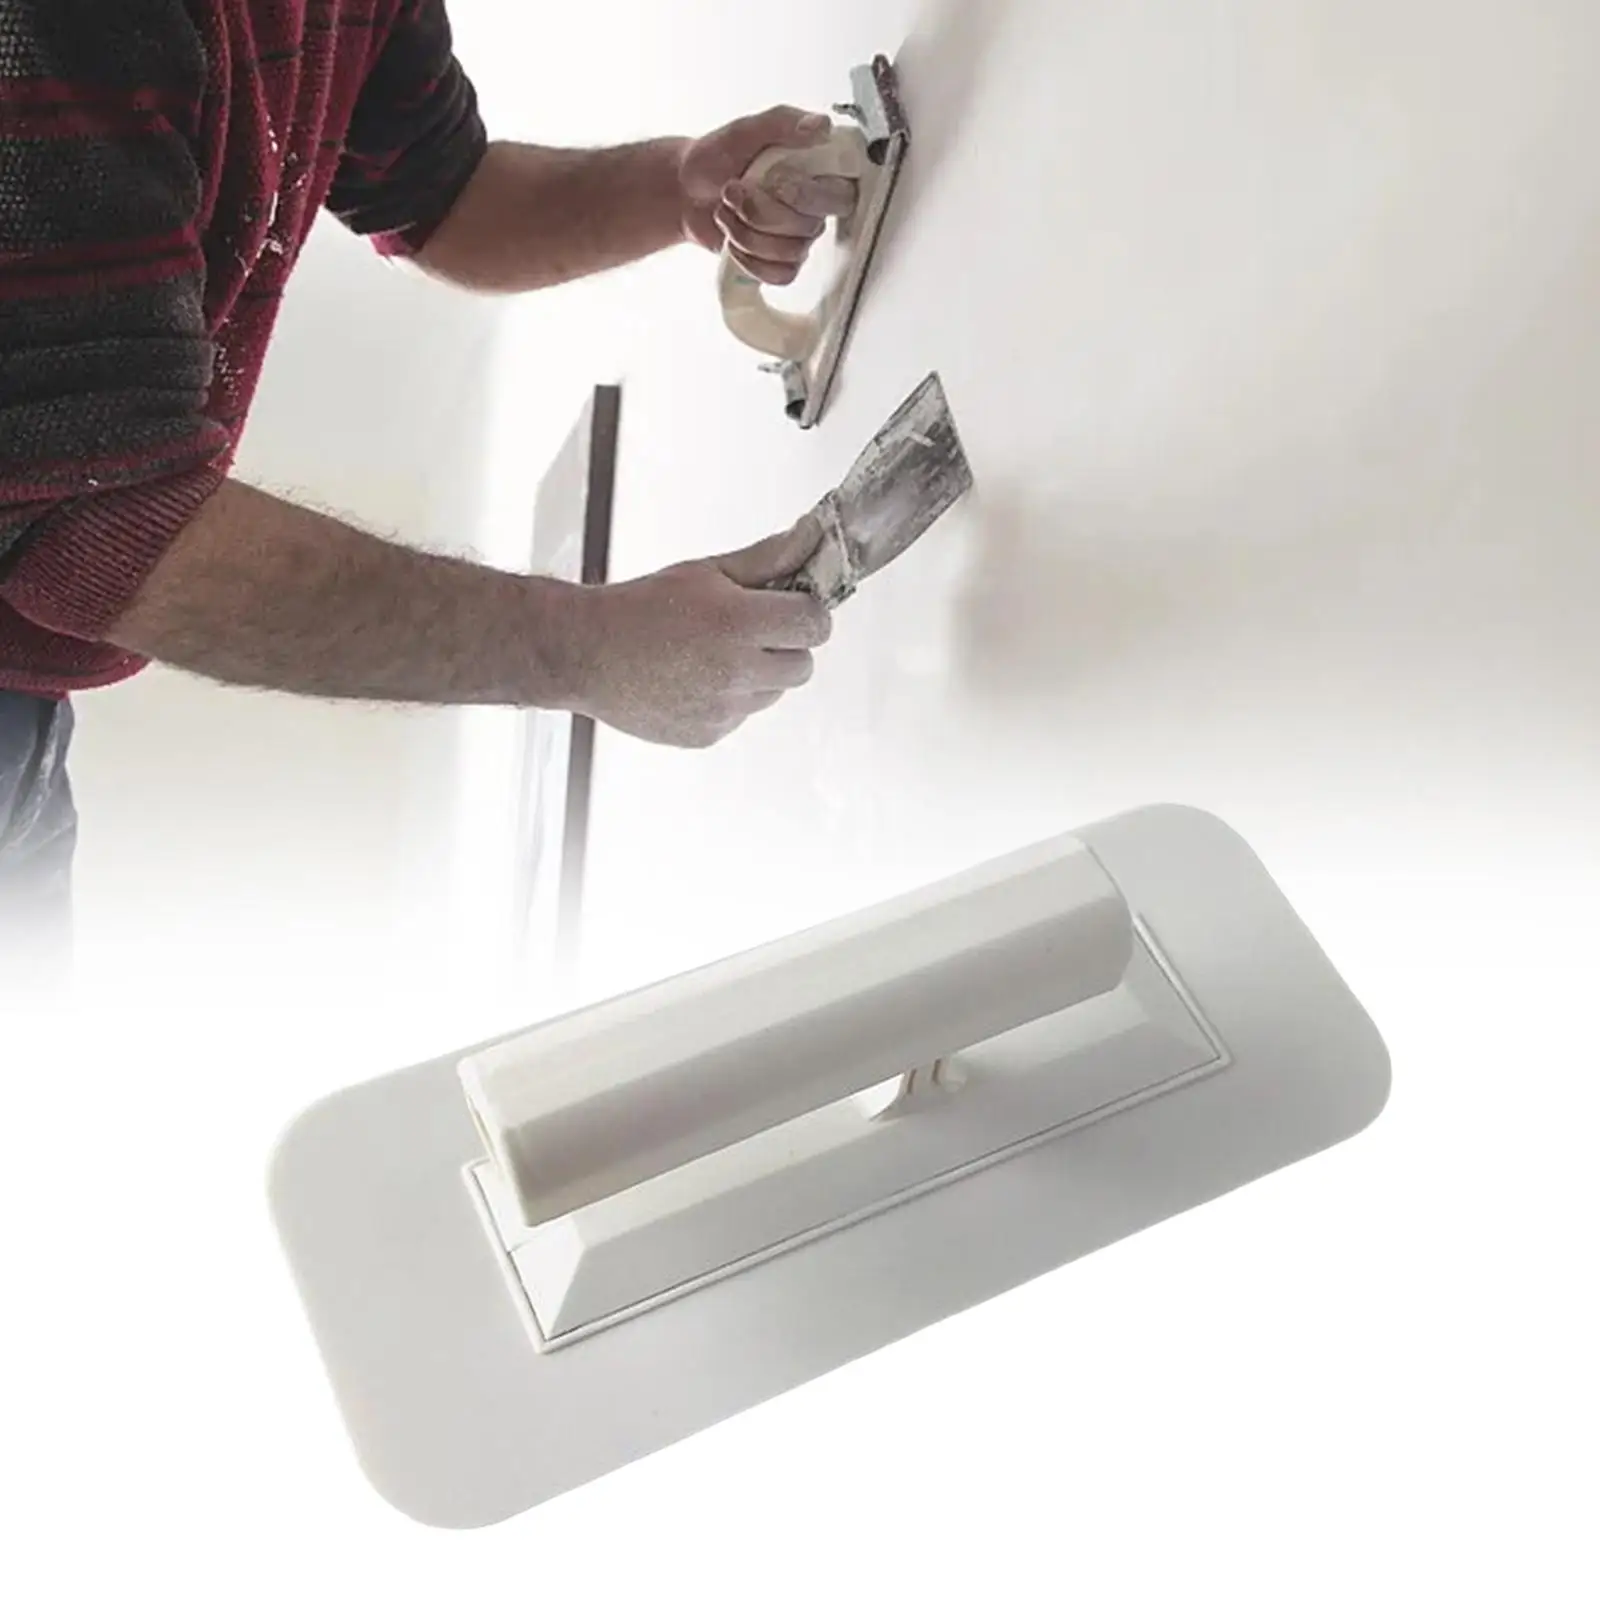 Finishing Trowel Easy to Use Fittings Drywall Skimming Blade Plastering Trowel for Concrete Grouting Float Pool Coatings